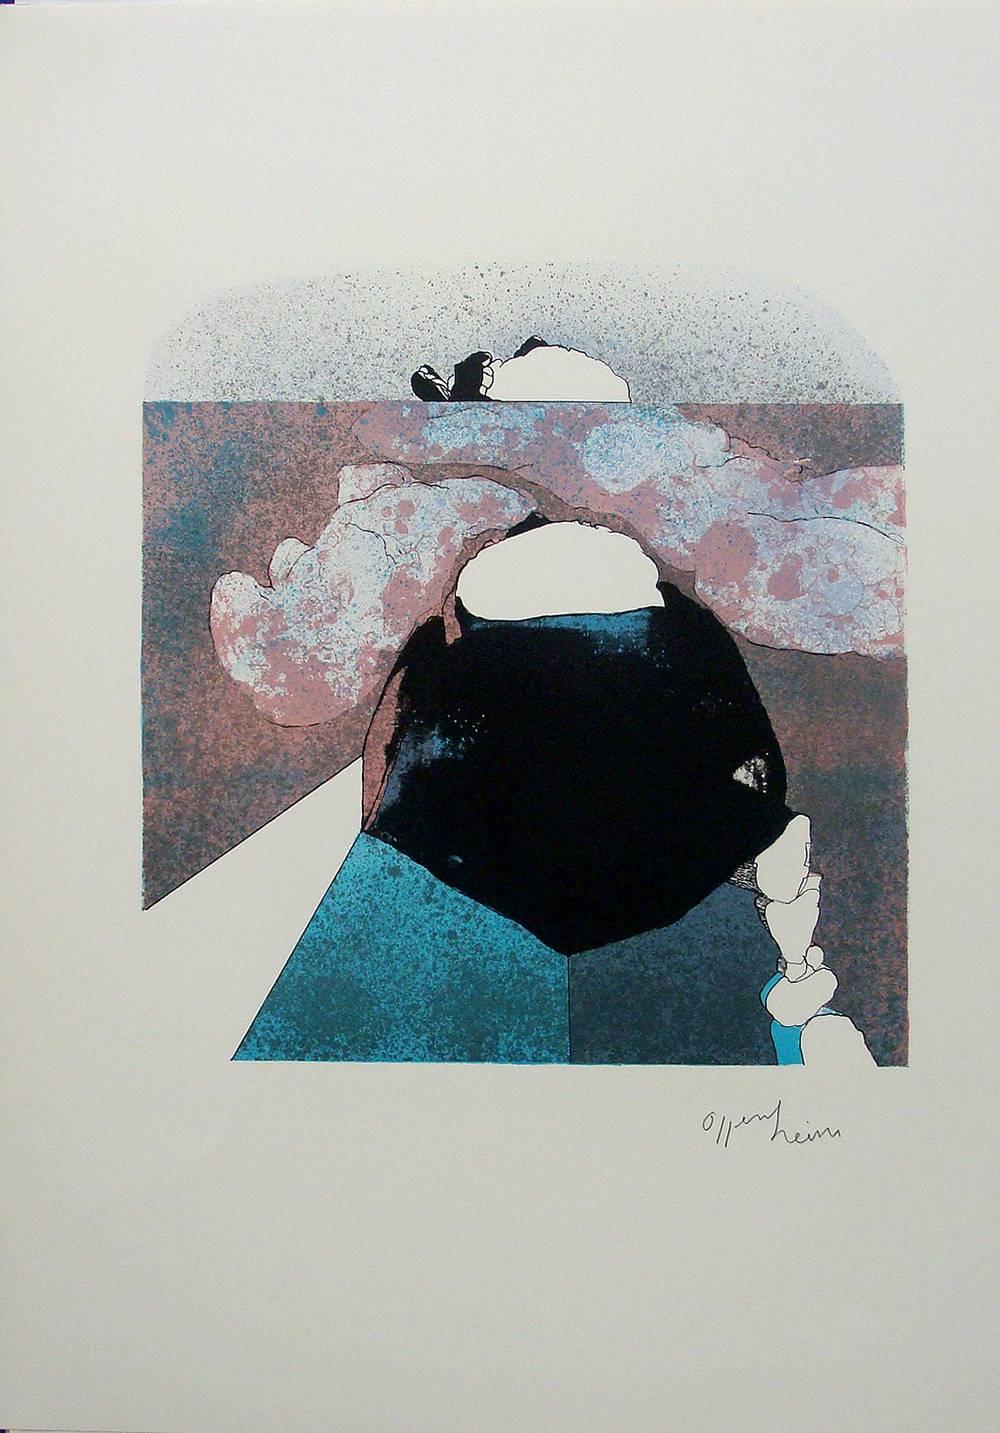 David H. Oppenheim Abstract Print - from "Obsession", a 10 piece suite of original hand signed Color Lithographs